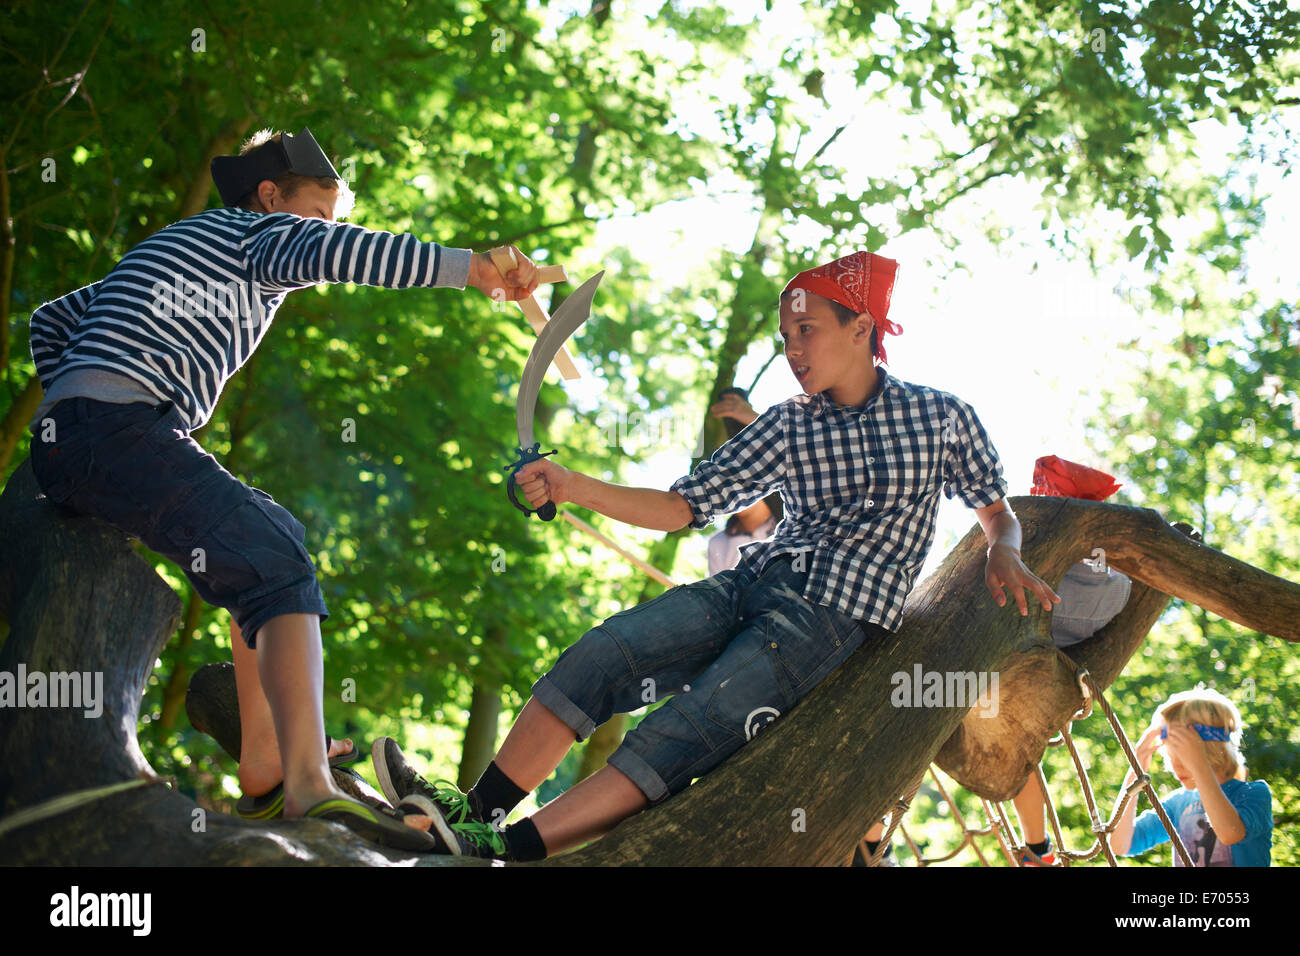 Young boys dressed as pirates, playing in tree Stock Photo